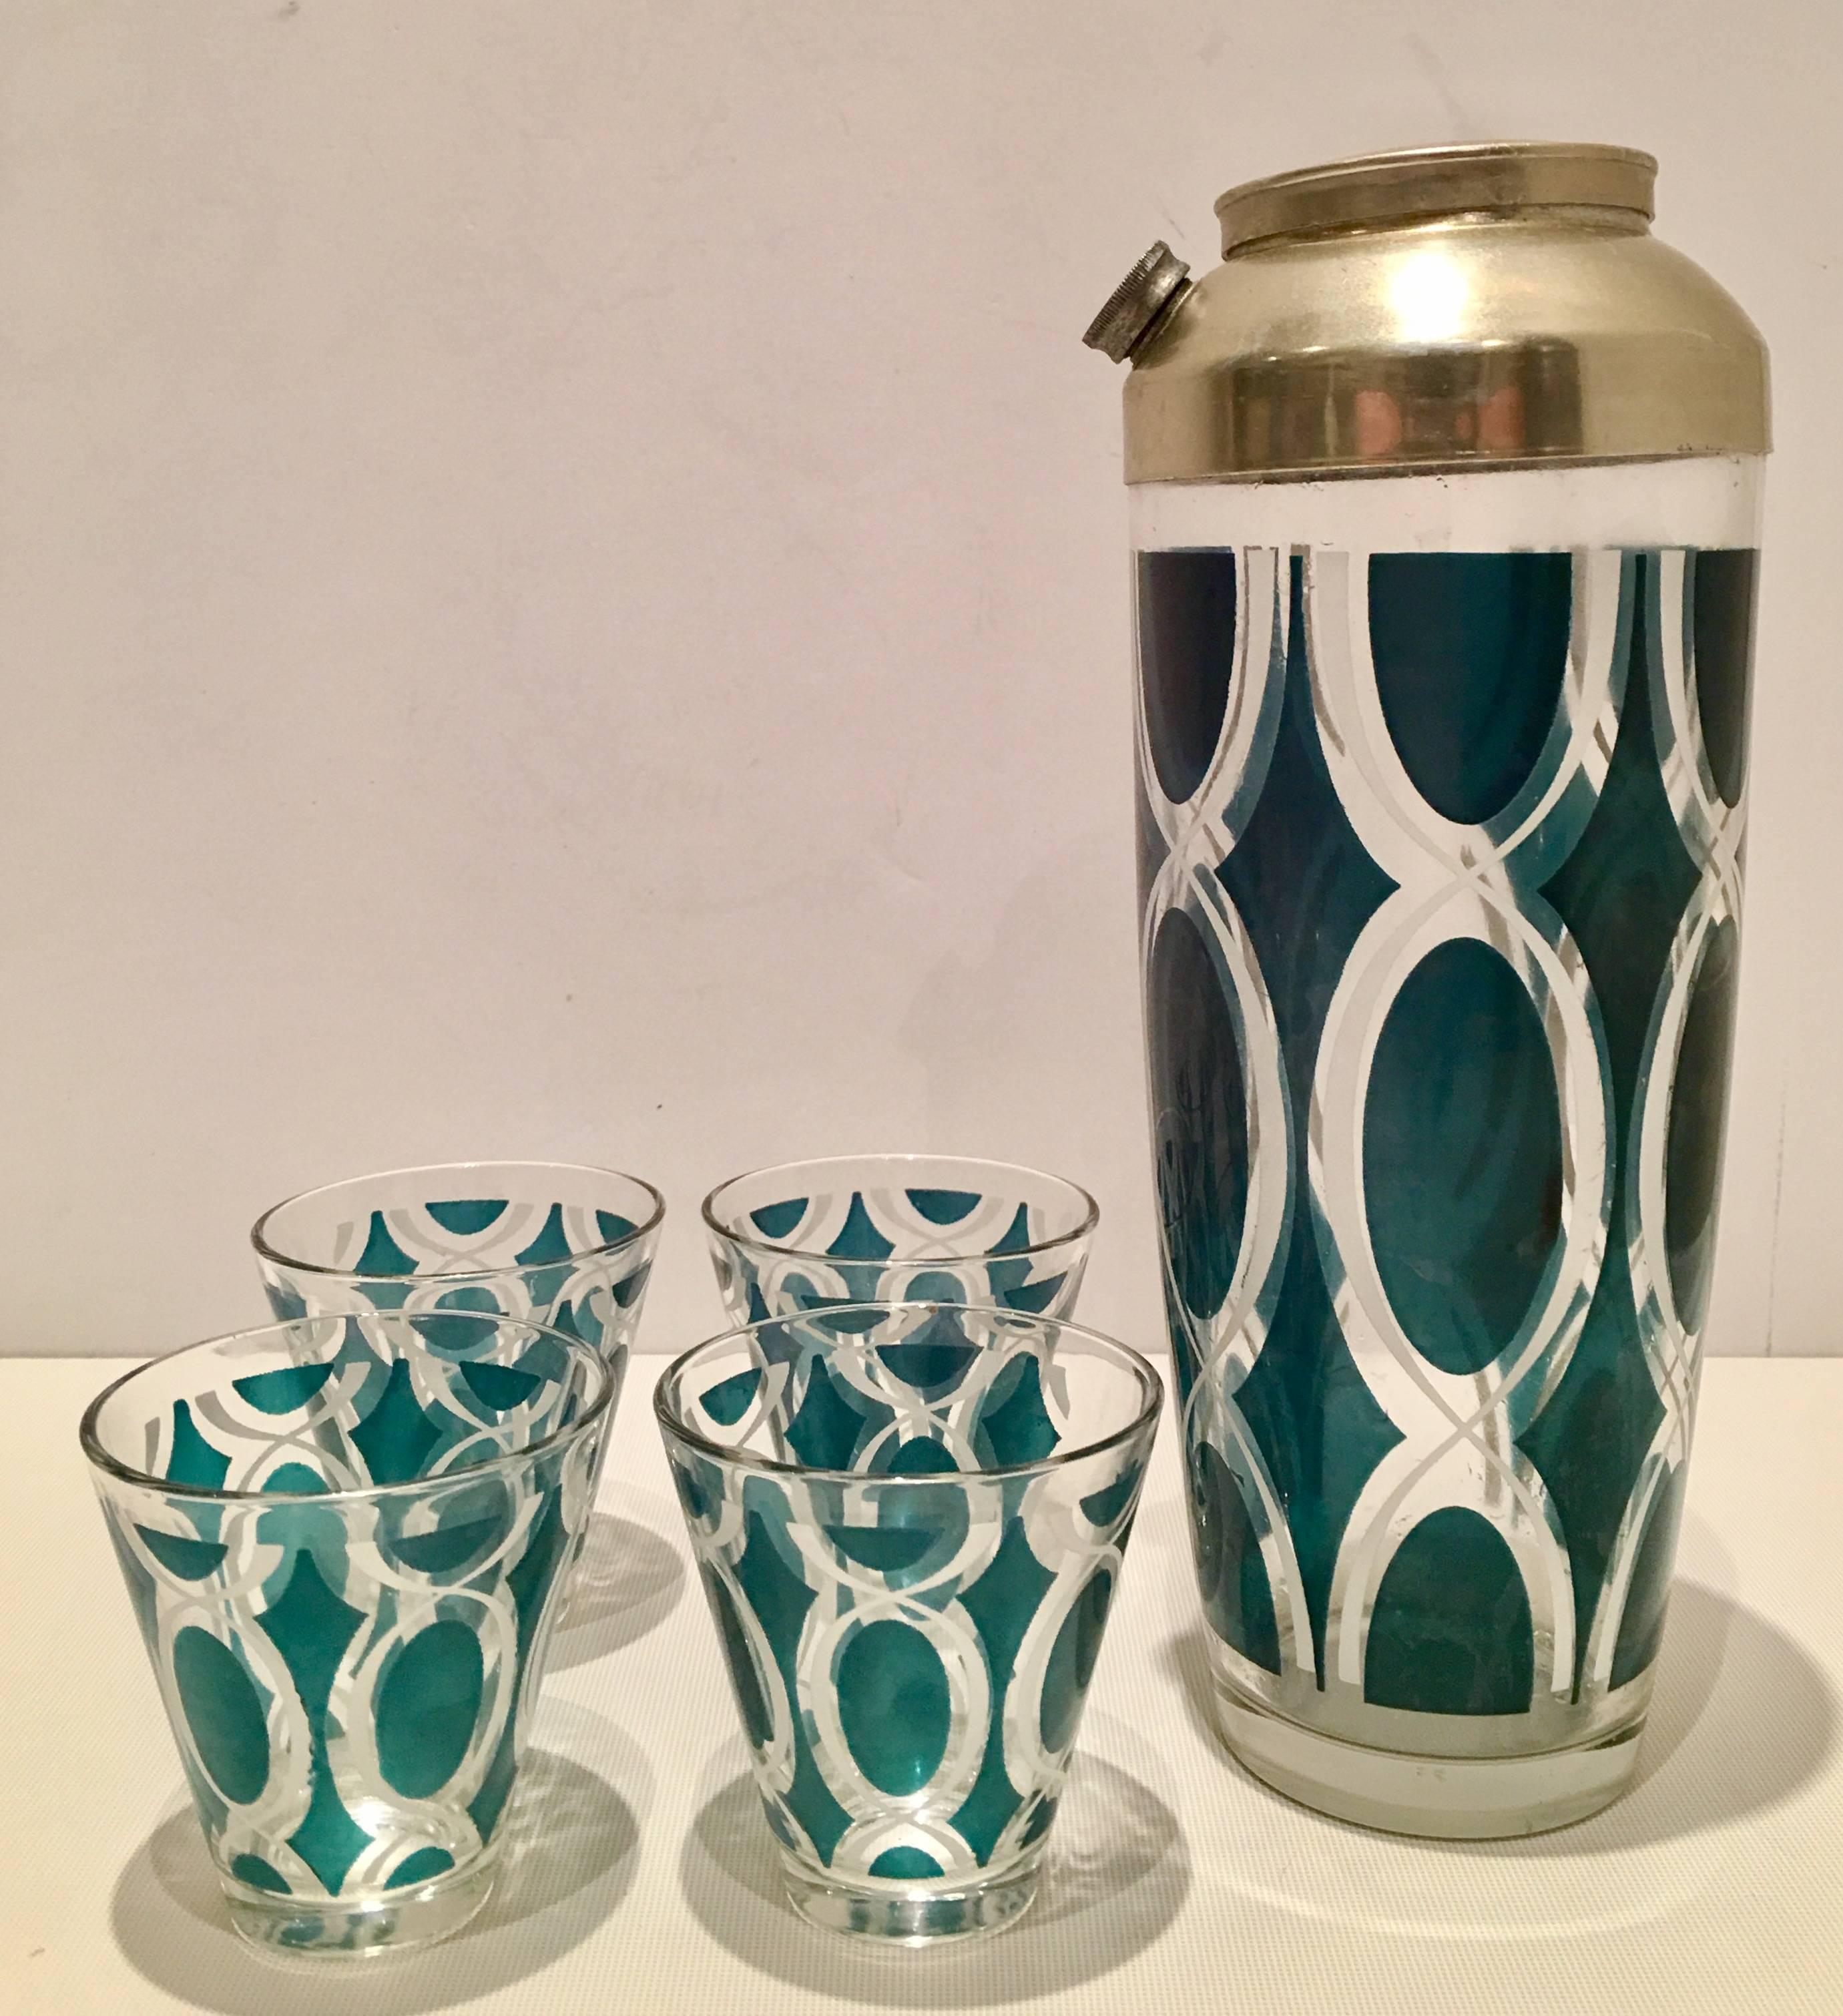 Mid-Century Bohemia glass seven piece drinks set. Features a emerald green and white geometric design. Includes four cocktail glasses and one three-piece cocktail shaker with silver plate two-piece top.
Cocktail glass measures, 3" H x